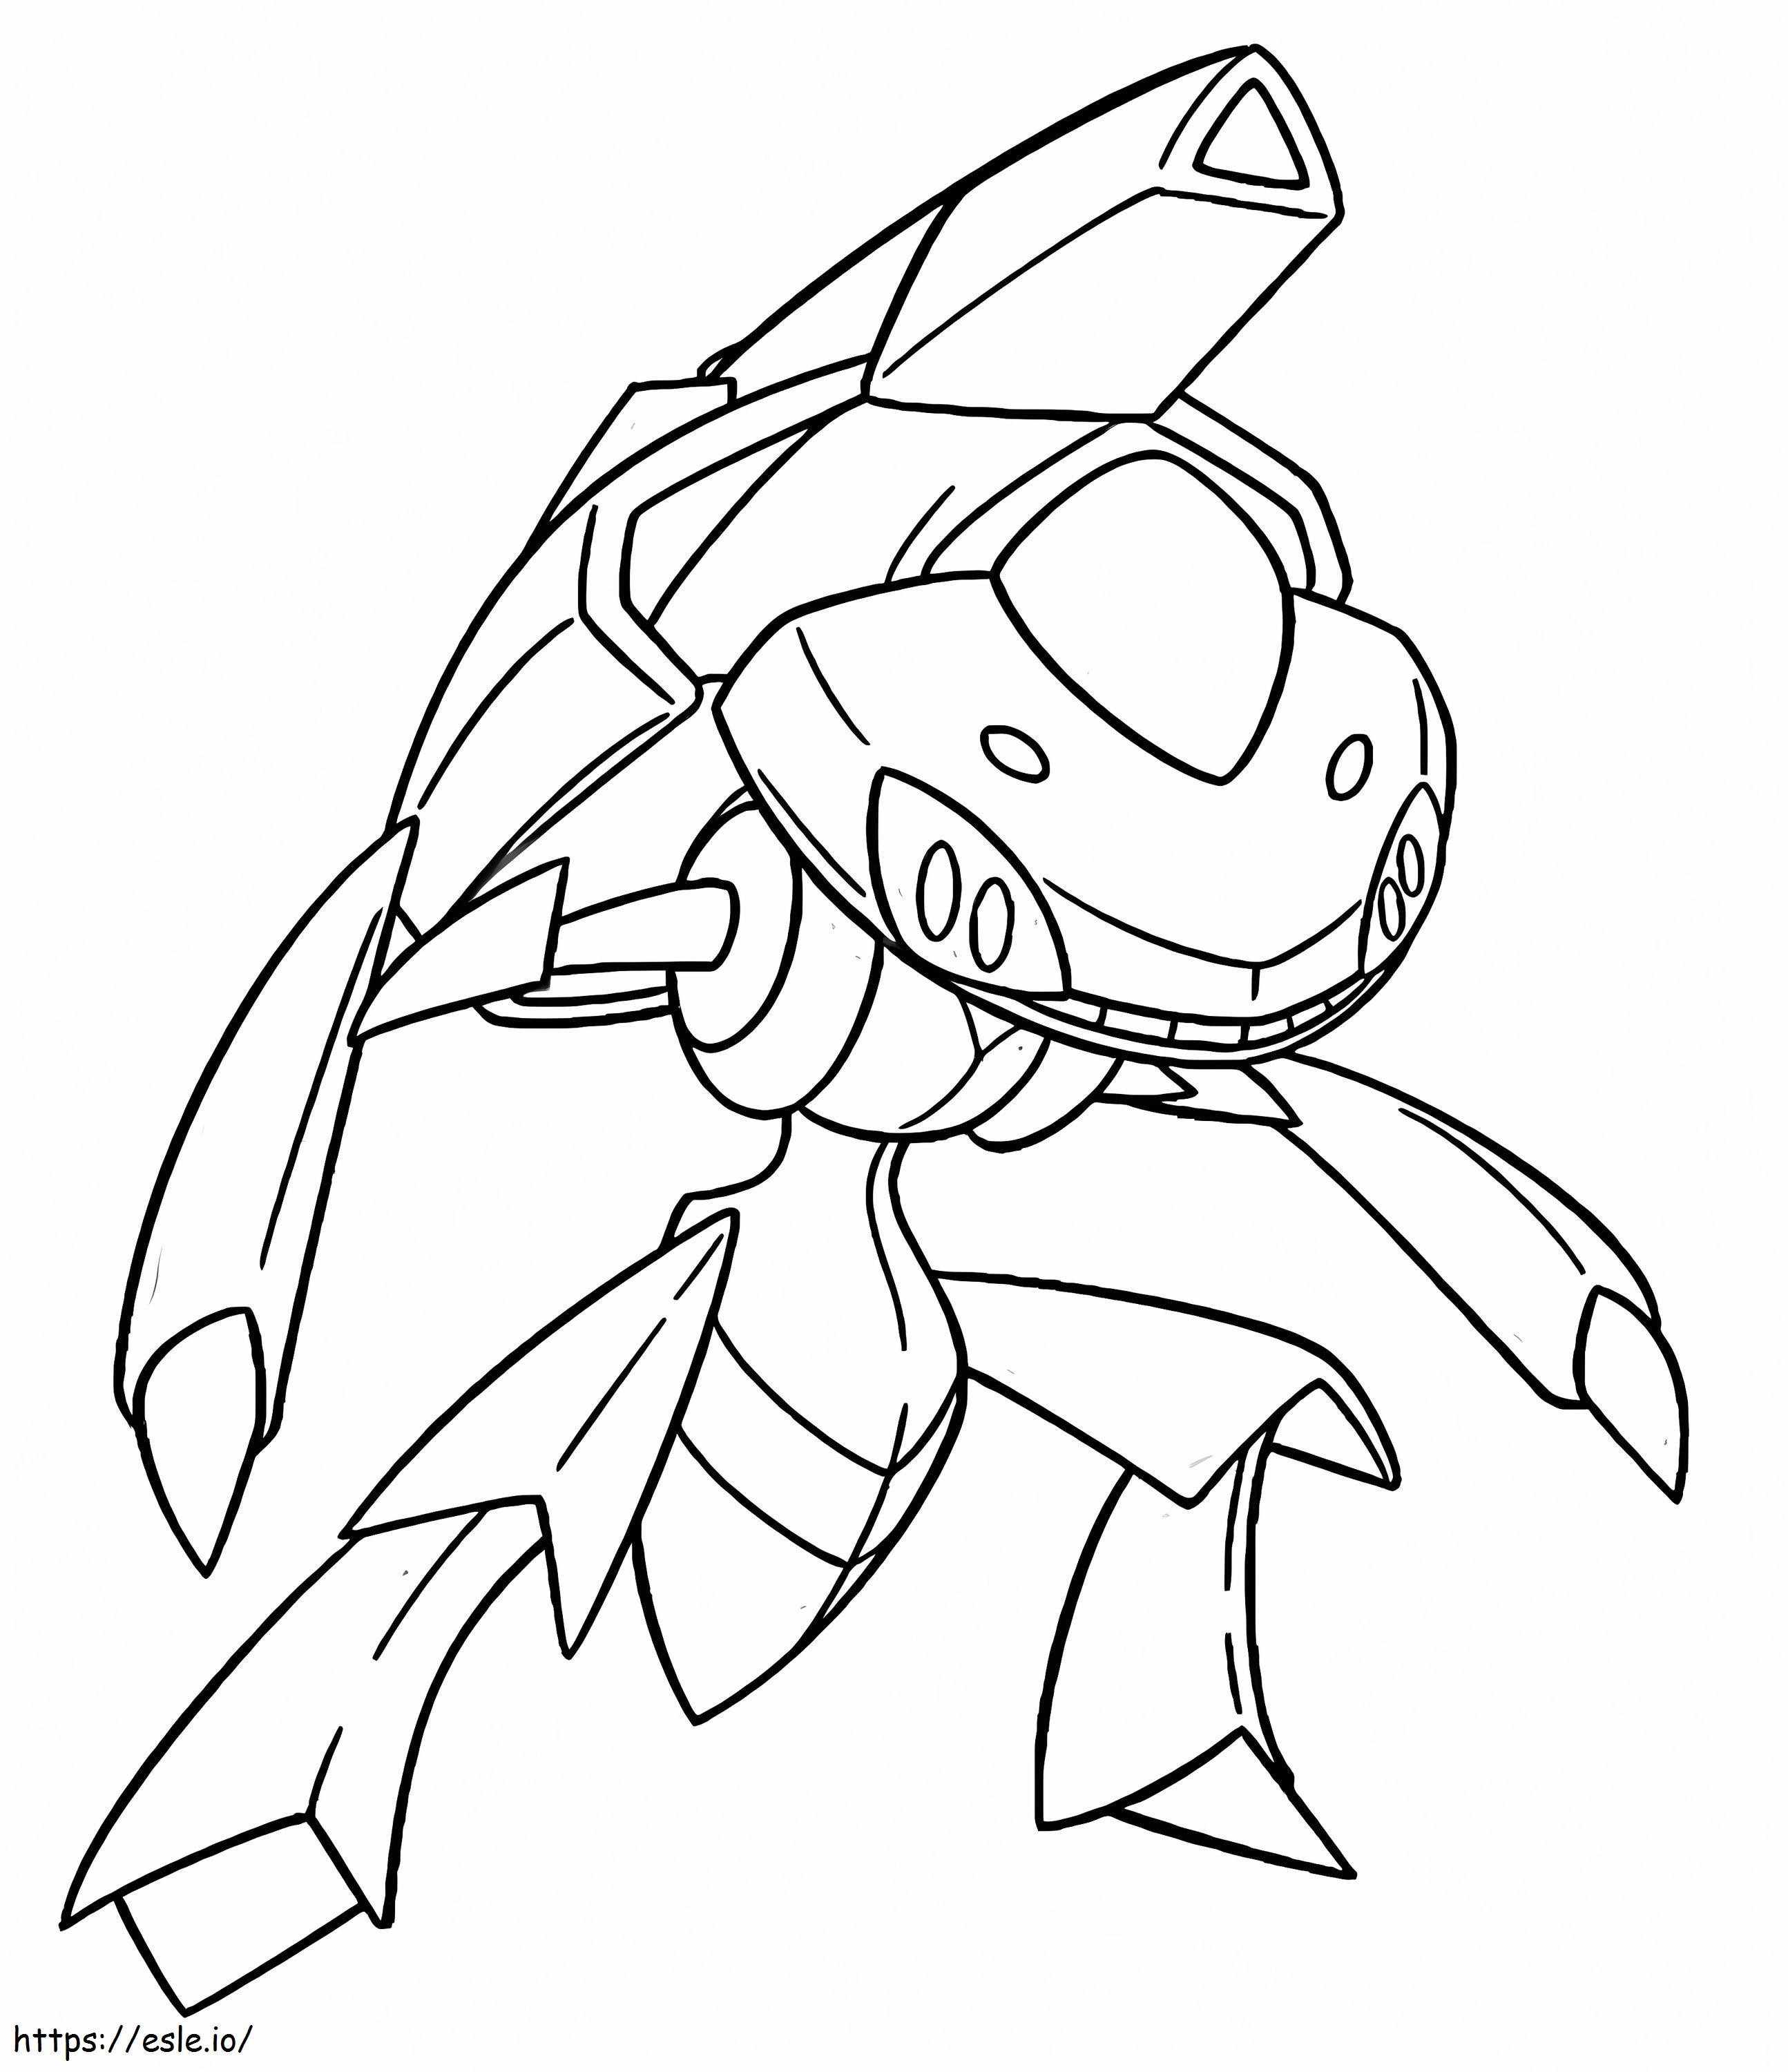 Genesect In Legendary Pokemon coloring page